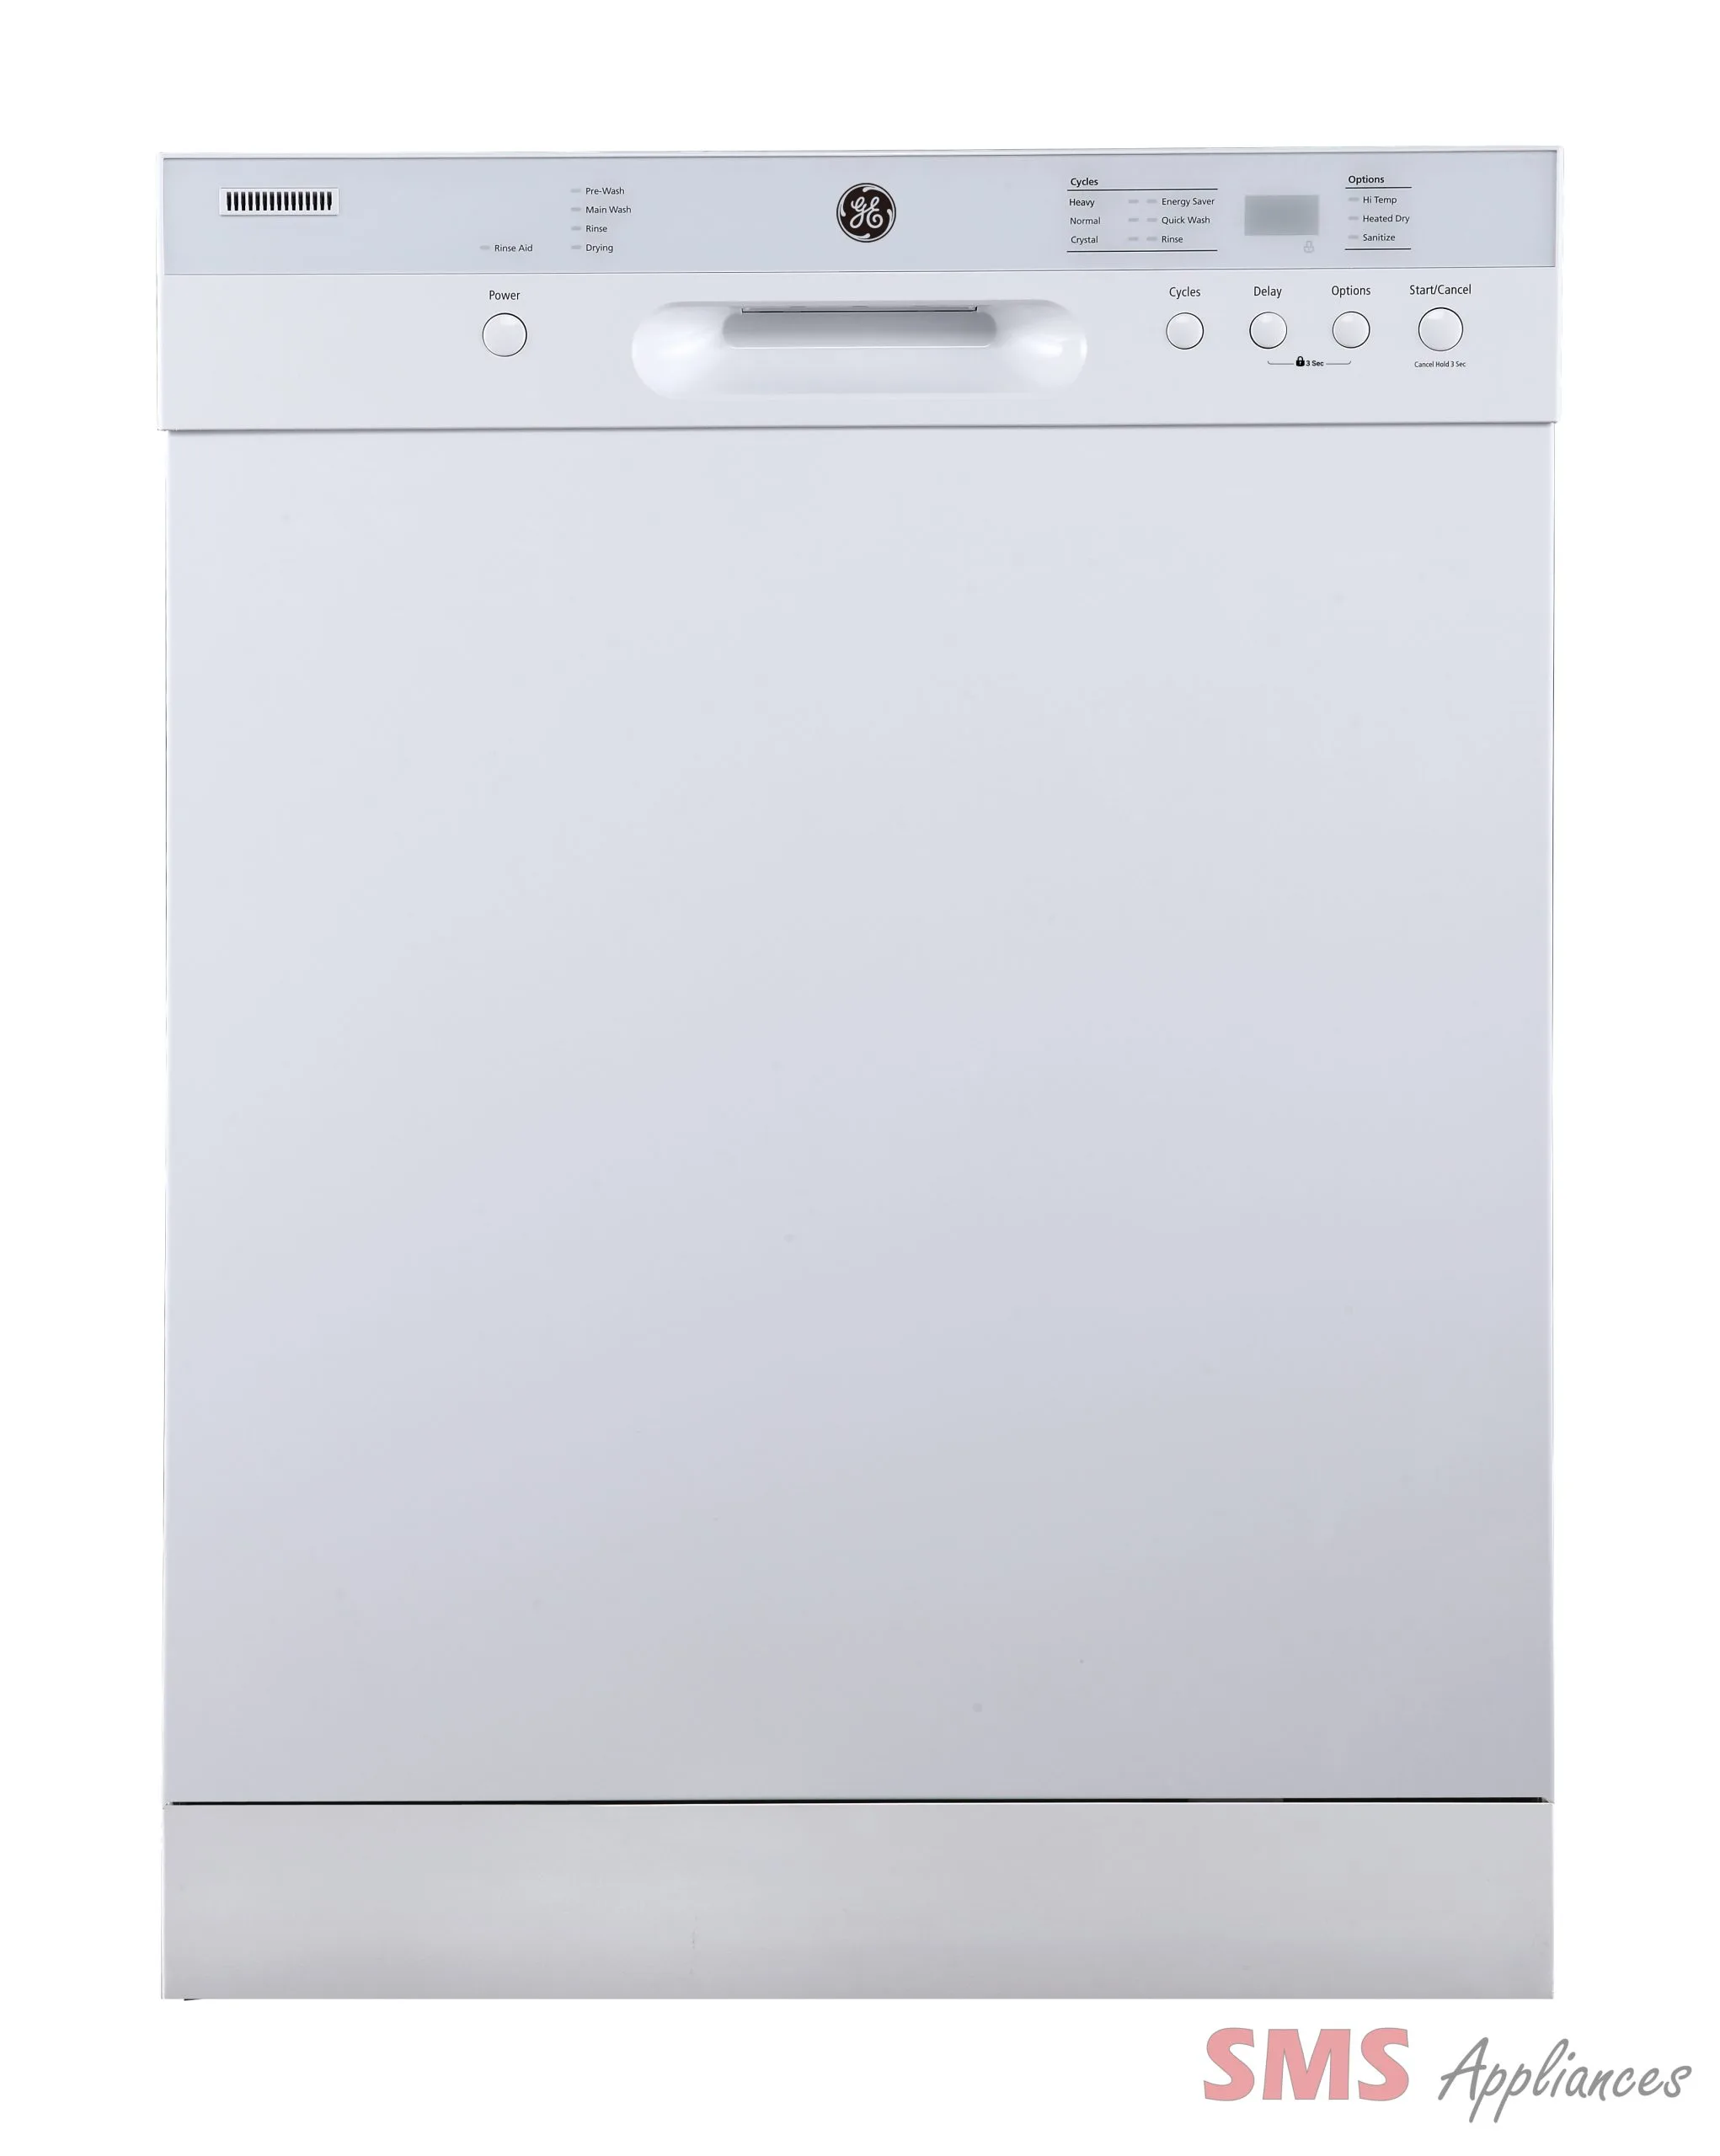 GE 24″ Built-In Front Control Dishwasher with Stainless Steel Tall Tub White – GBF532SGPWW